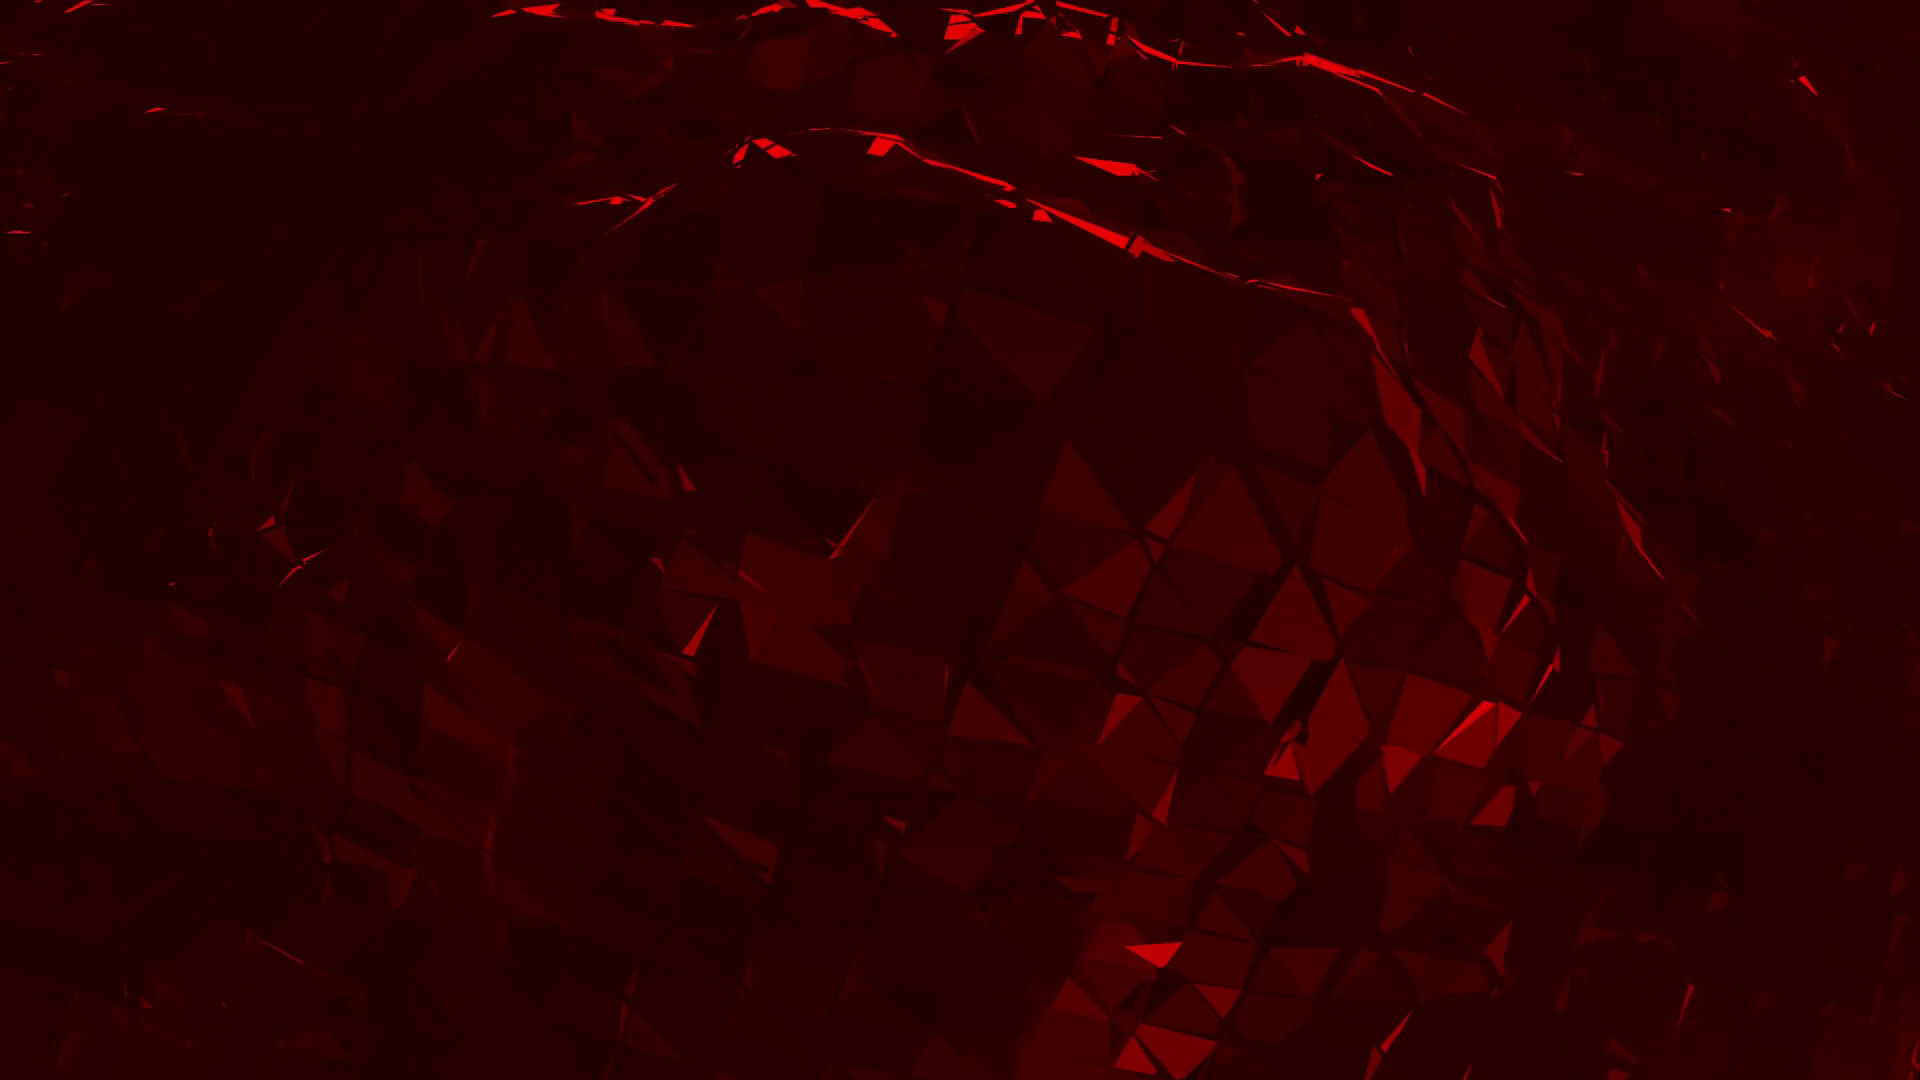 1920x1080 Dark red low poly waving surface as unique background. Dark red polygonal  geometric vibrating environment or pulsating background in cartoon low poly  ...